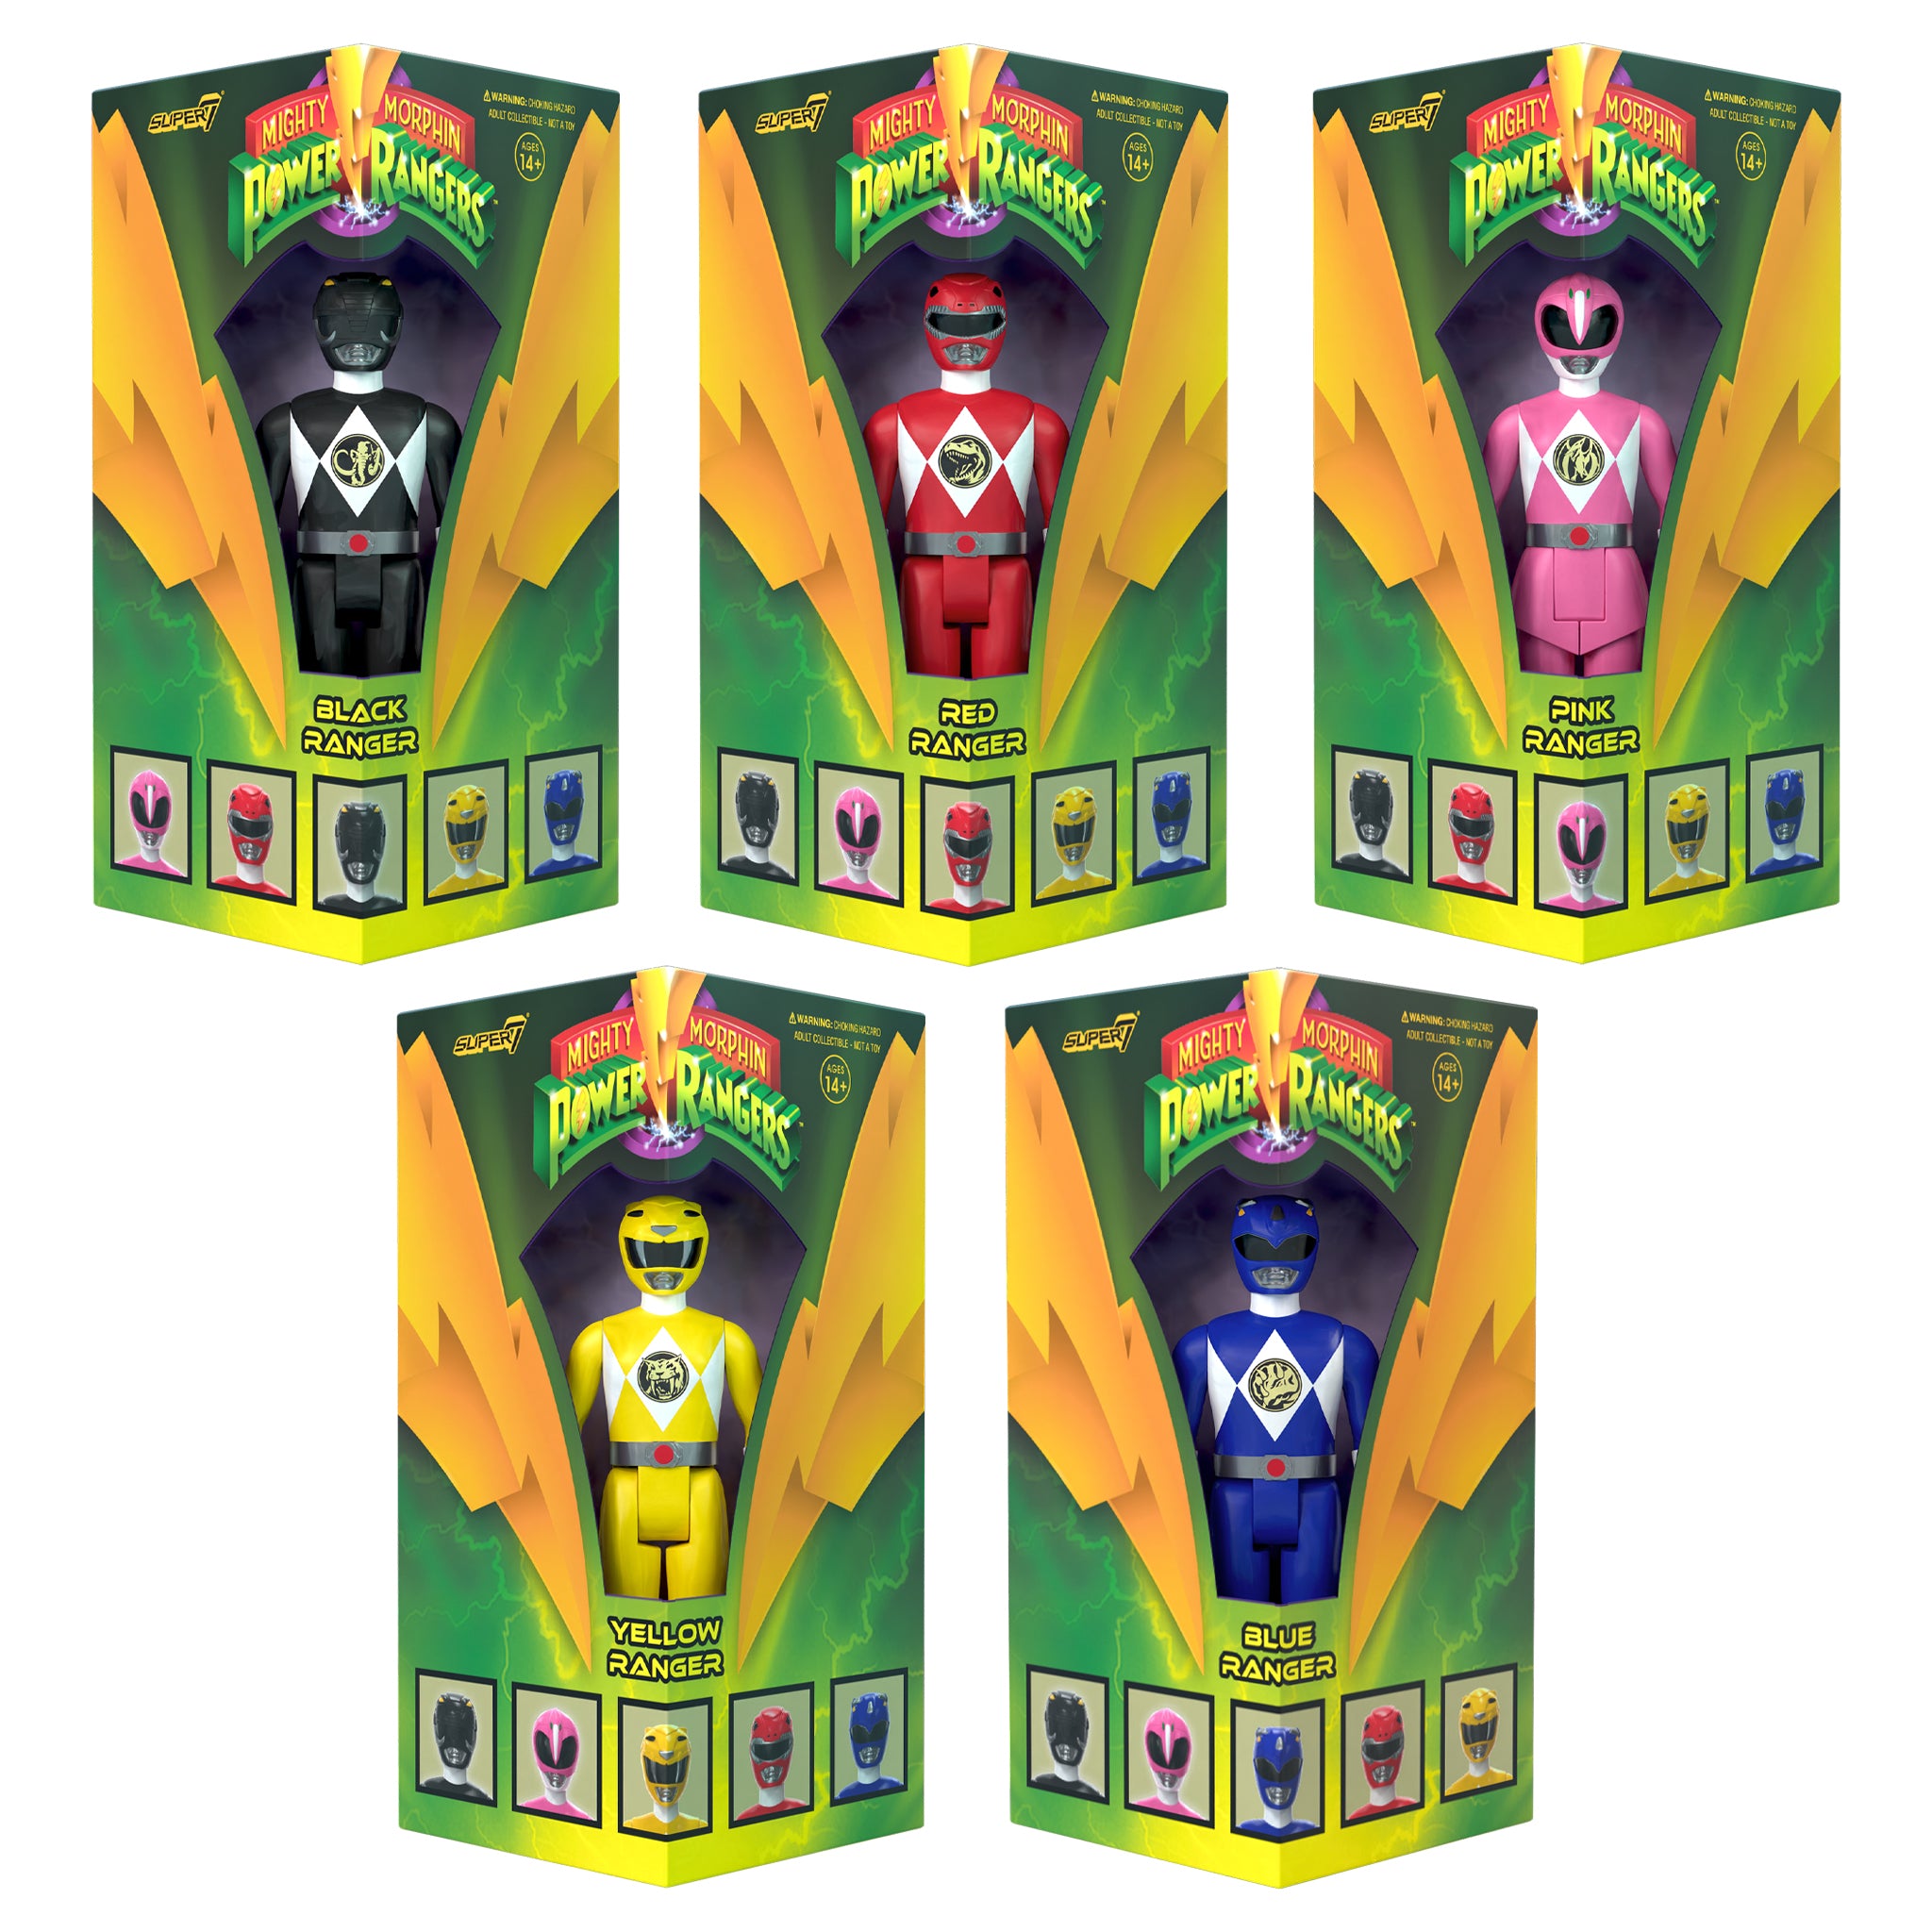 Mighty Morphin Power Rangers ReAction - Triangle Box Set of 5